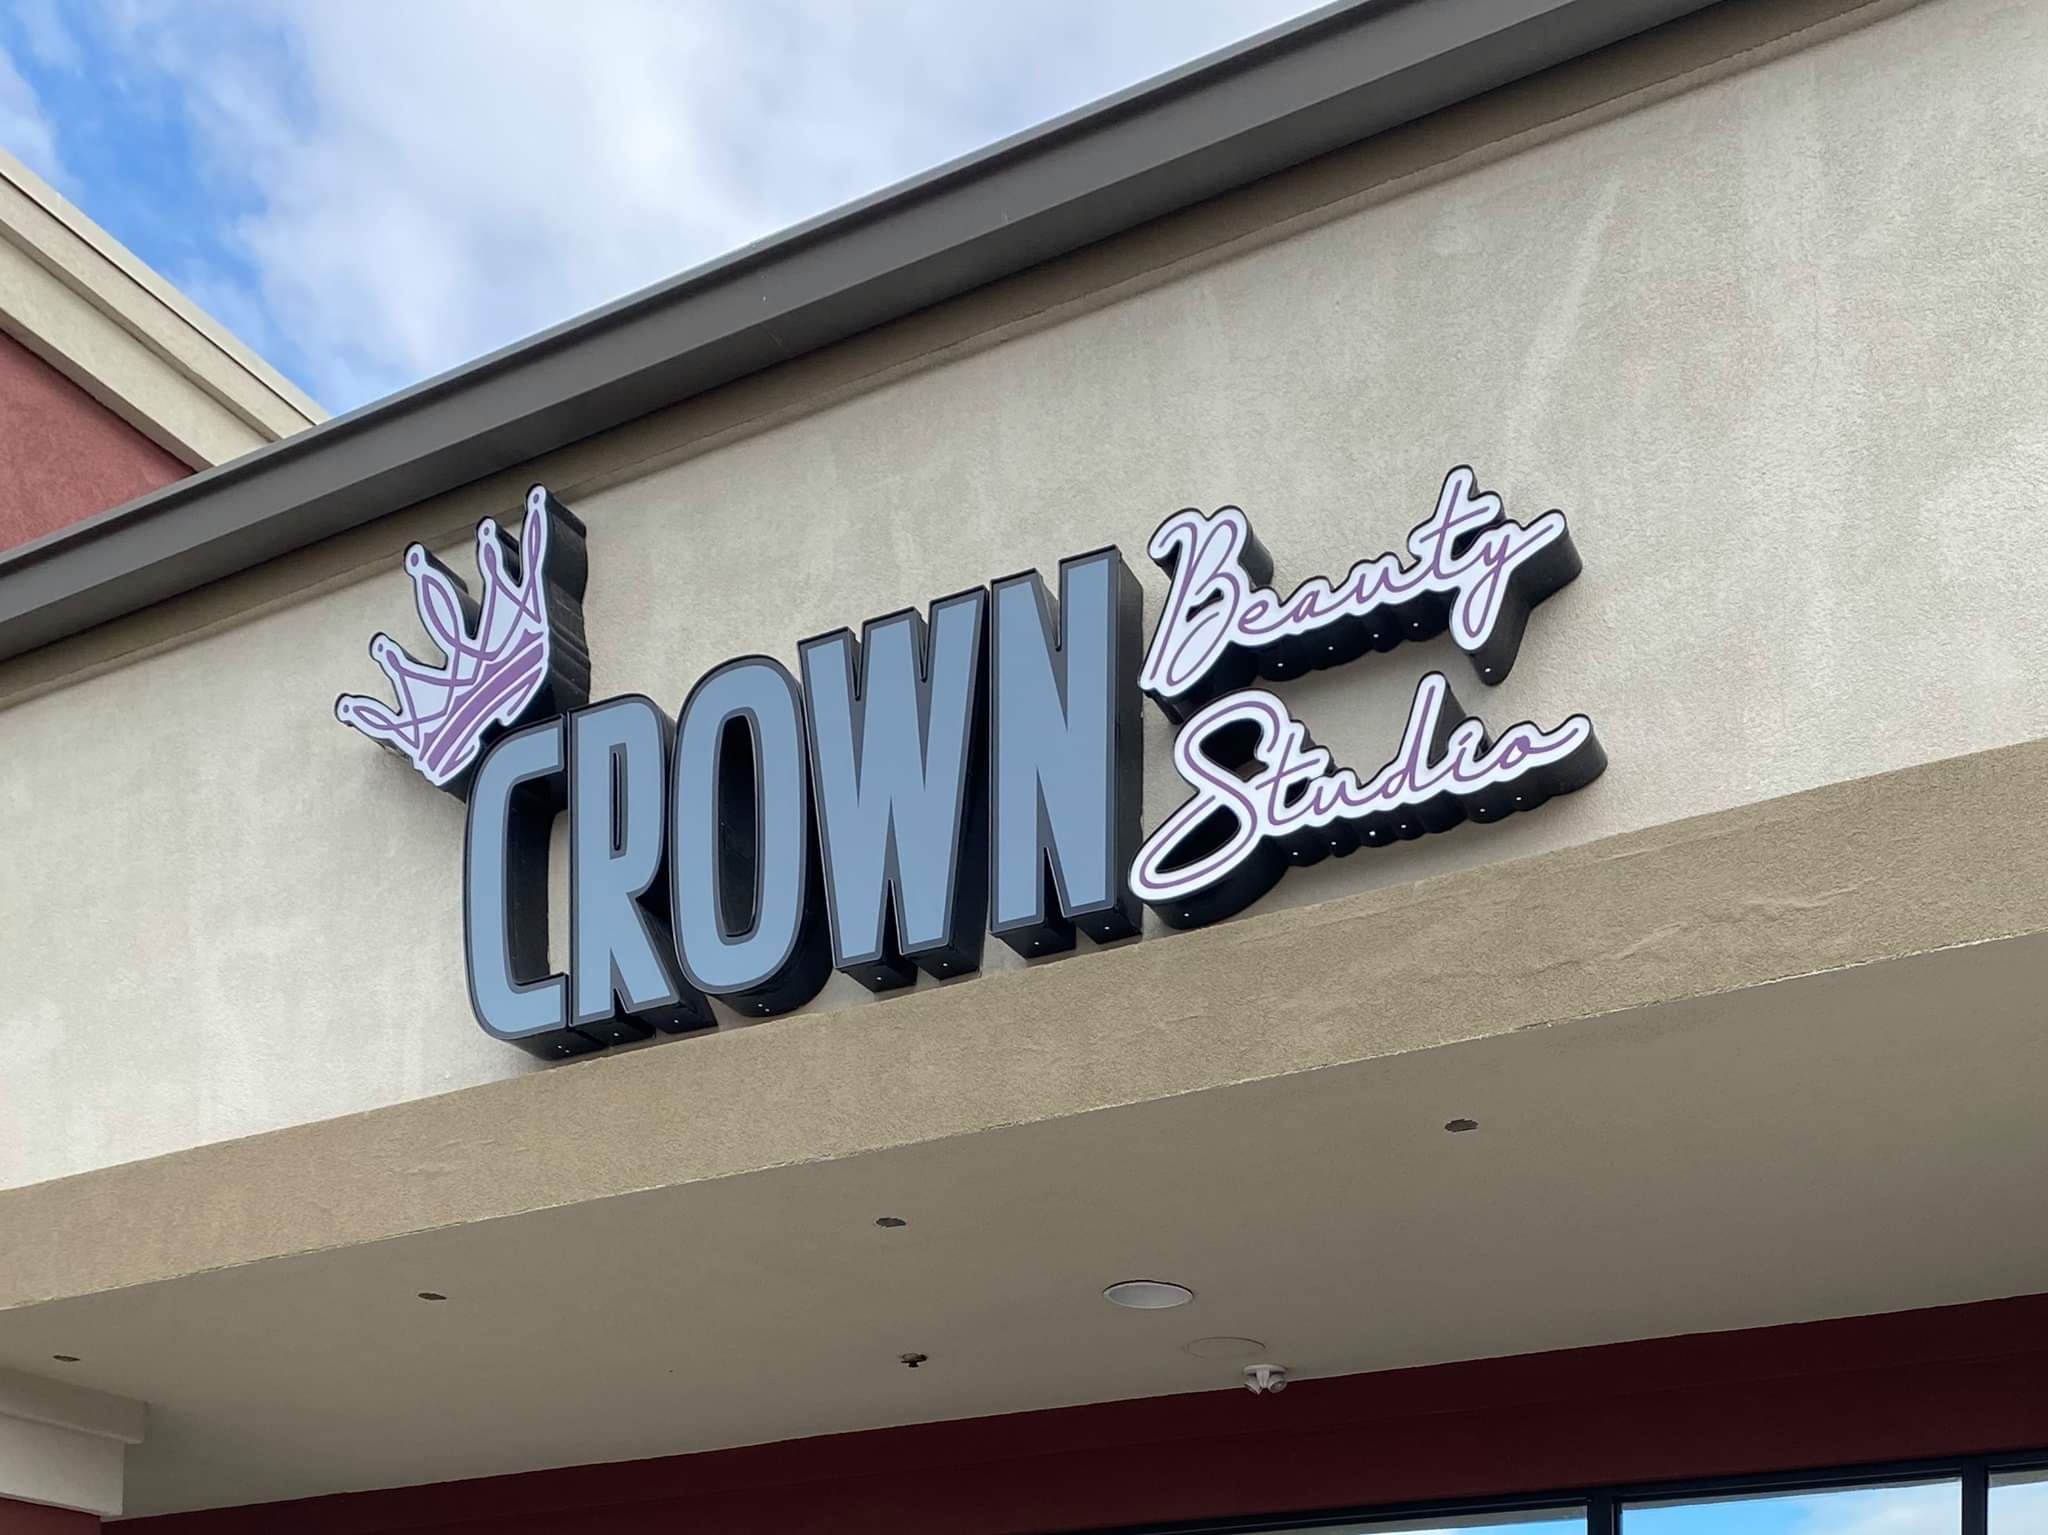 Crown Beauty studio Logo at the store front